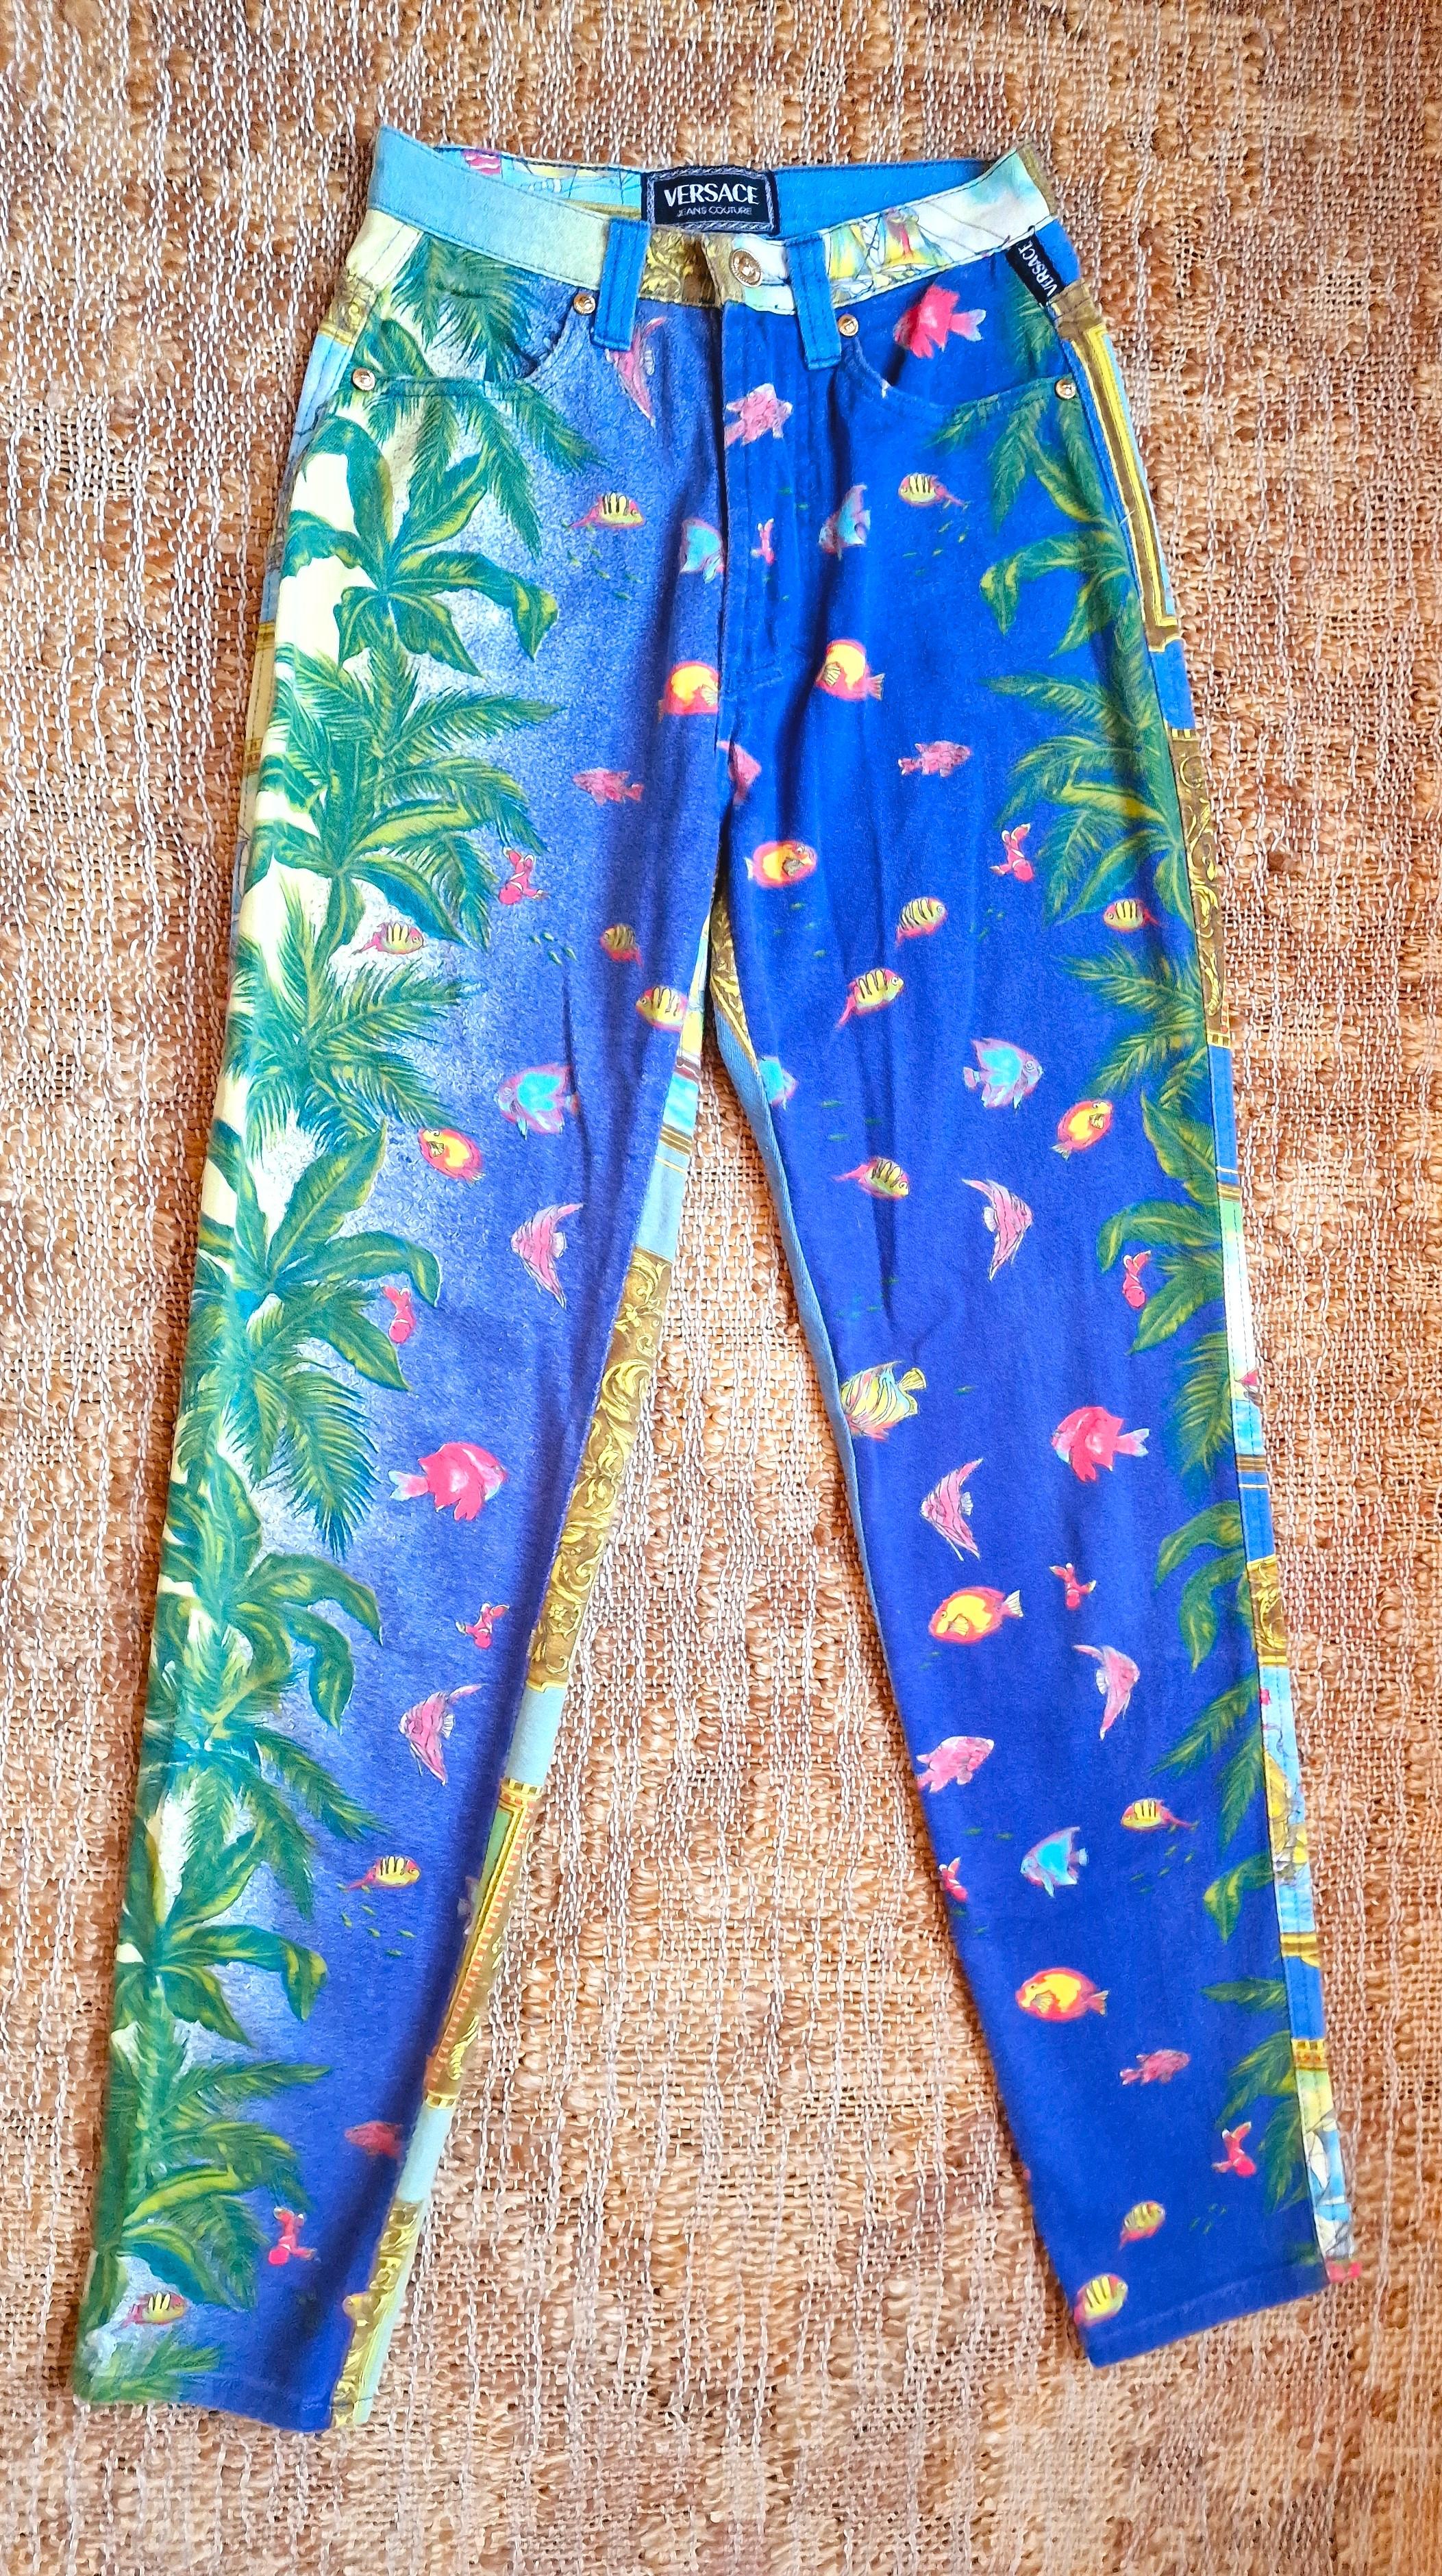 Ocean pants by Gianni Versace!
- BACK PRINTS: ships on the oceans.
- FRONT PRINTS: fish in the ocean.

VERY GOOD condition!

SIZE
Fits for small and smaller medium.
Strechy fabric.
Marked size: 27/41.
Length: 100 cm / 39.4 inch
Waist: 31 cm / 12.2